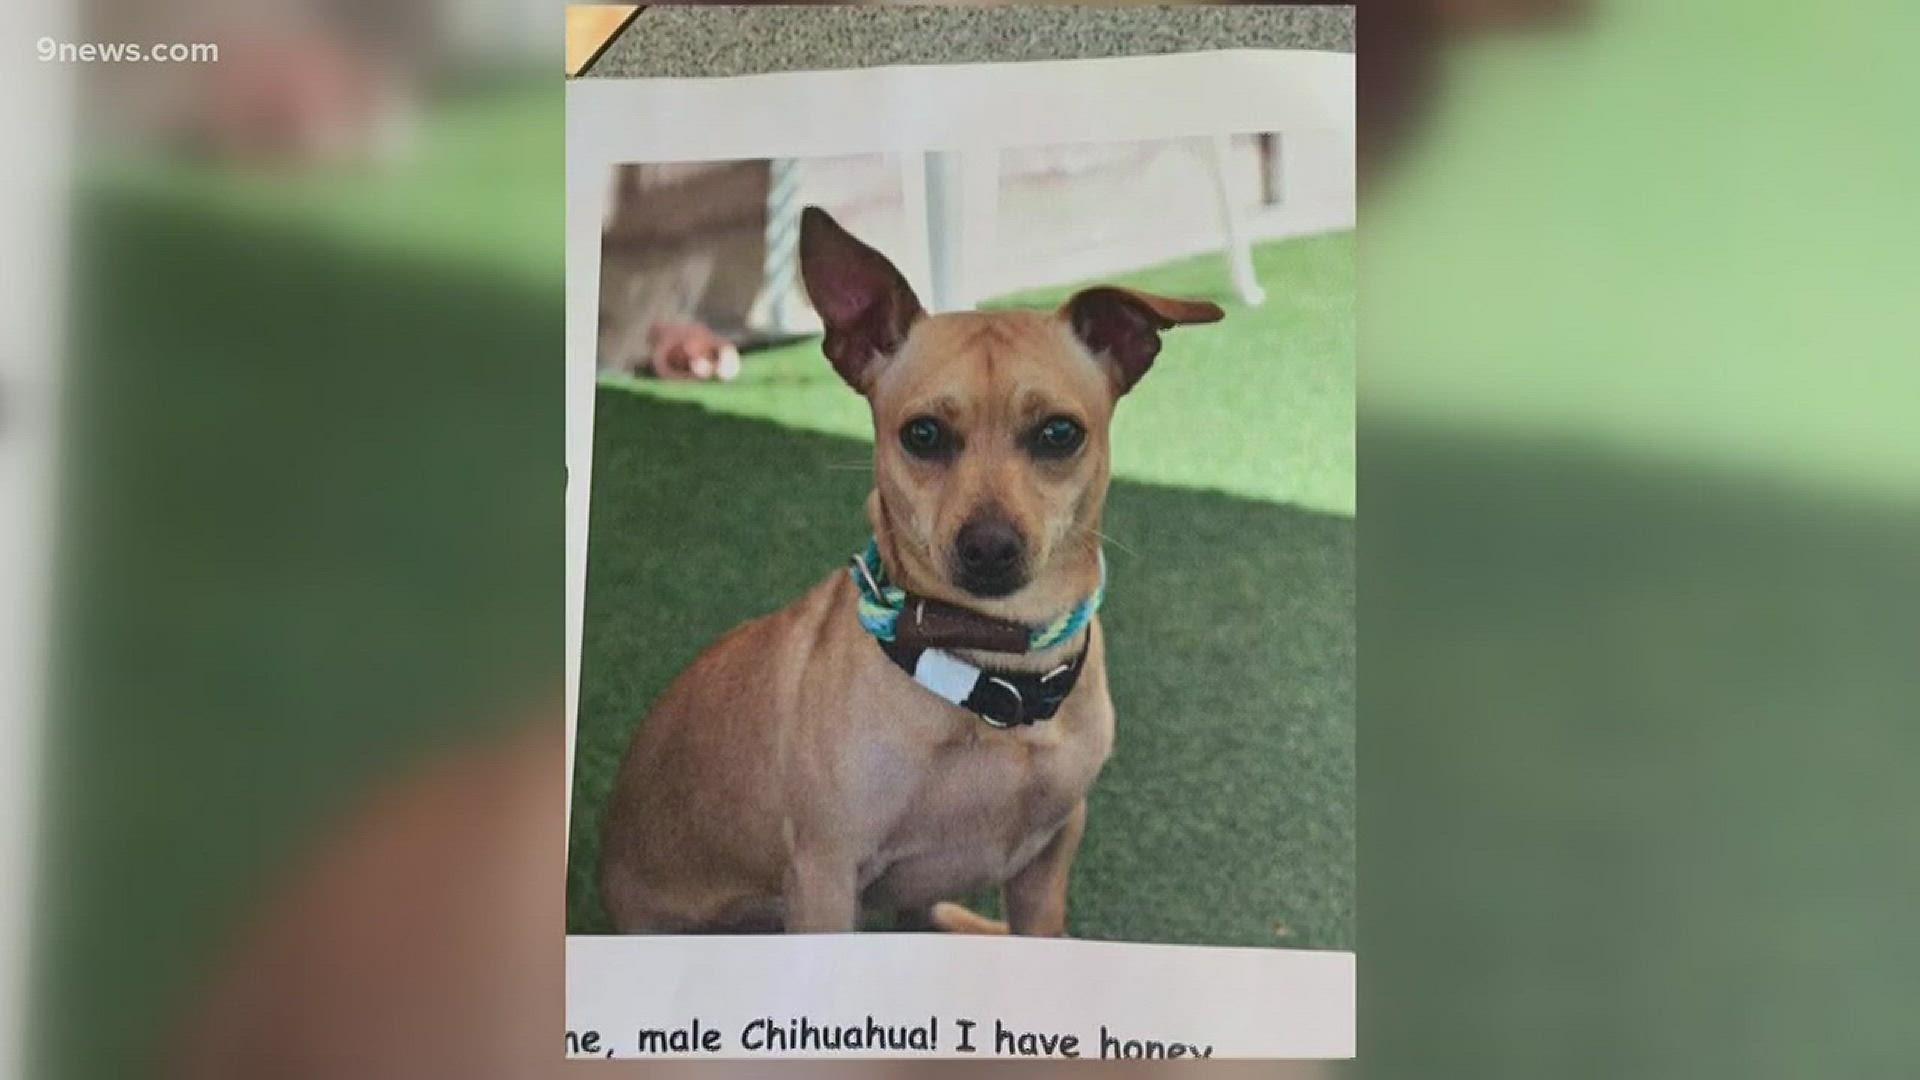 A no-kill shelter in Denver had a dog stolen this week. They are currently trying to locate the man suspected of taking the dog